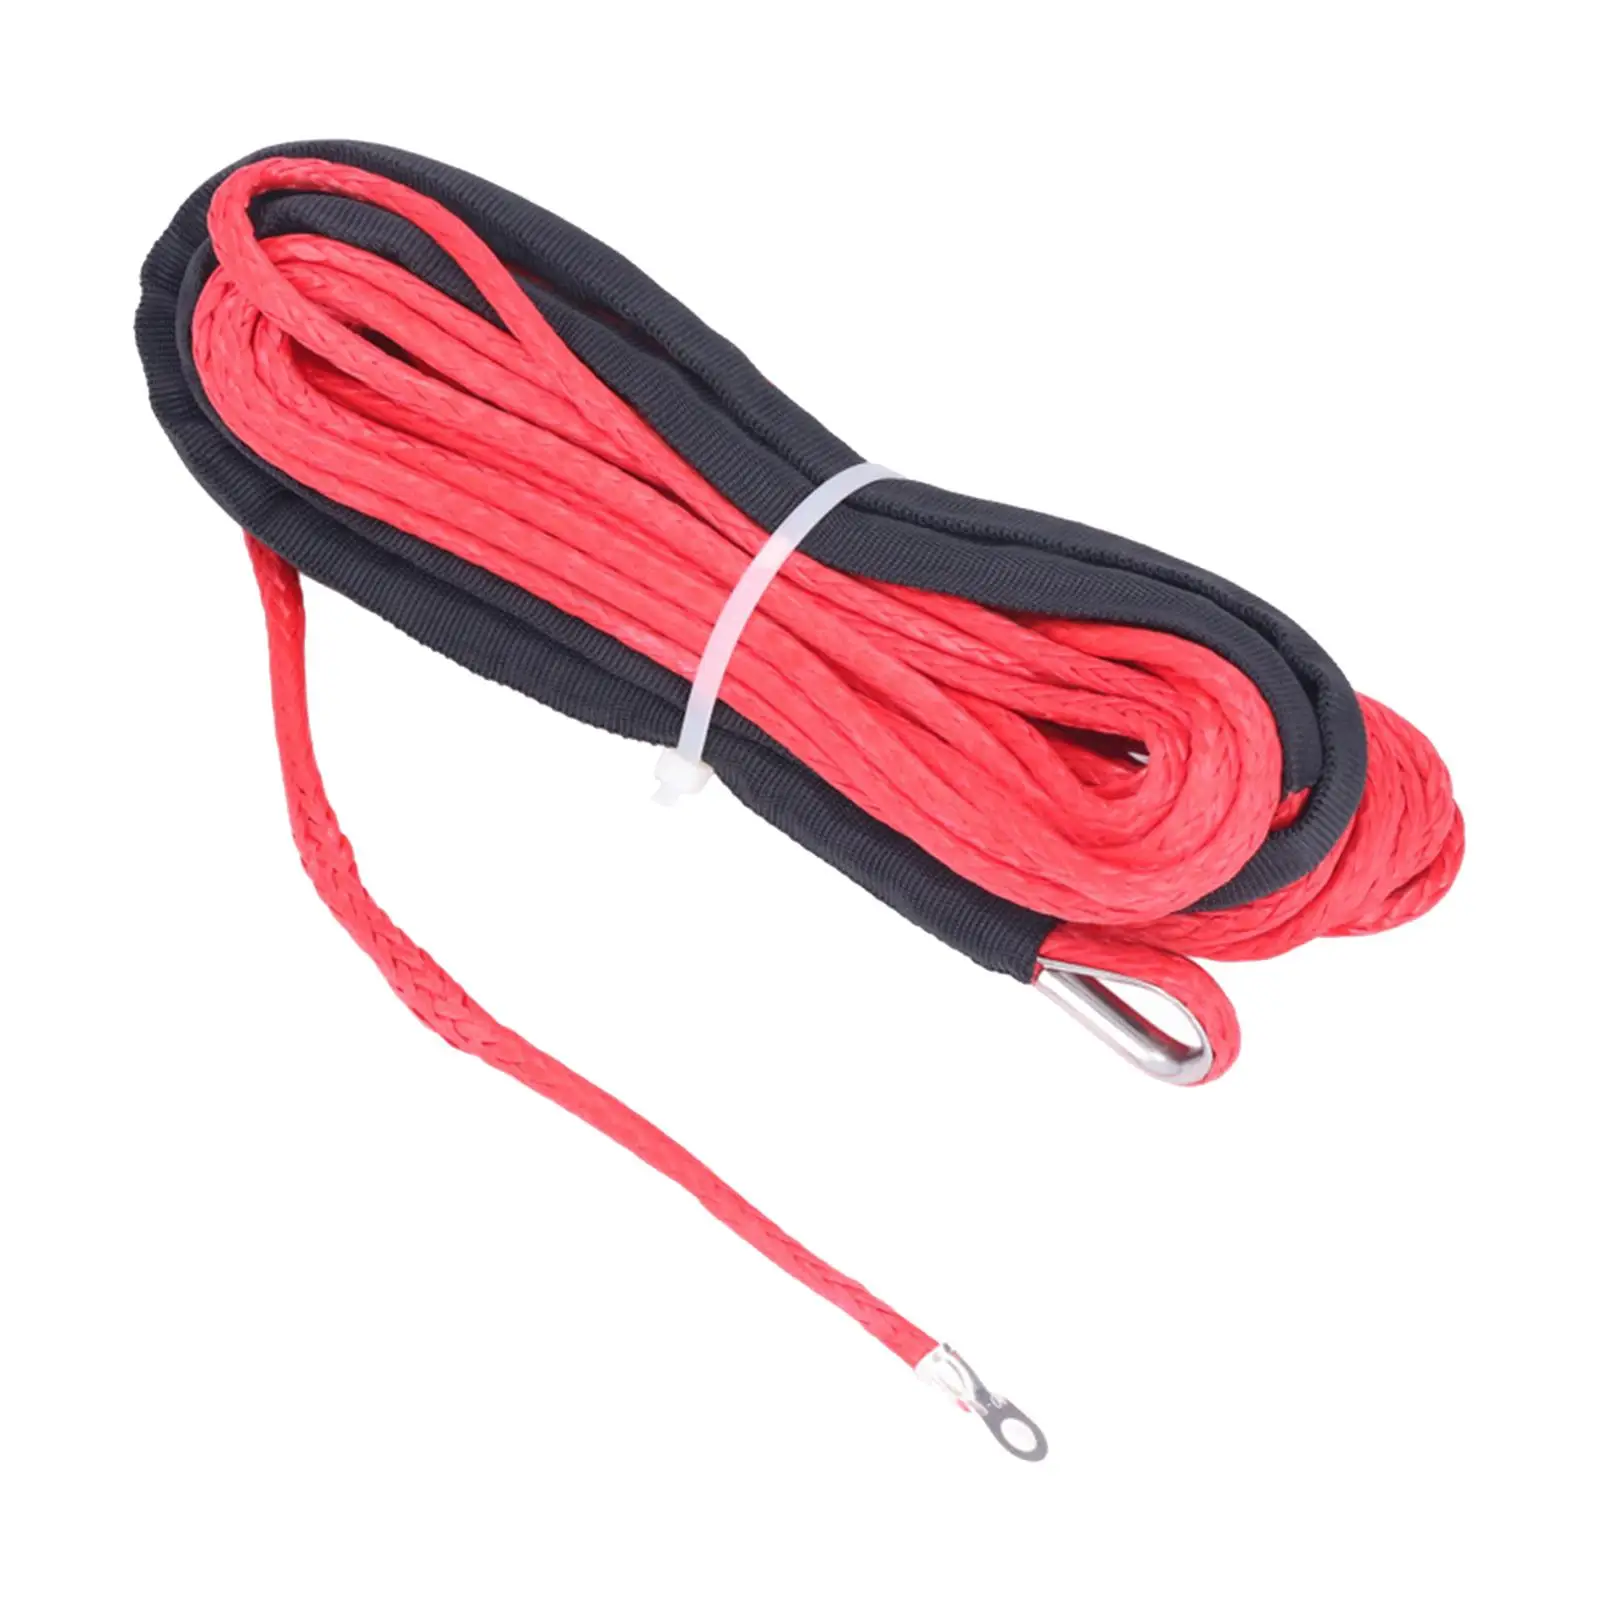 Synthetic Winch Rope 50ft Vehicles Towing 2.5T Towing Winch Cable Cars Truck